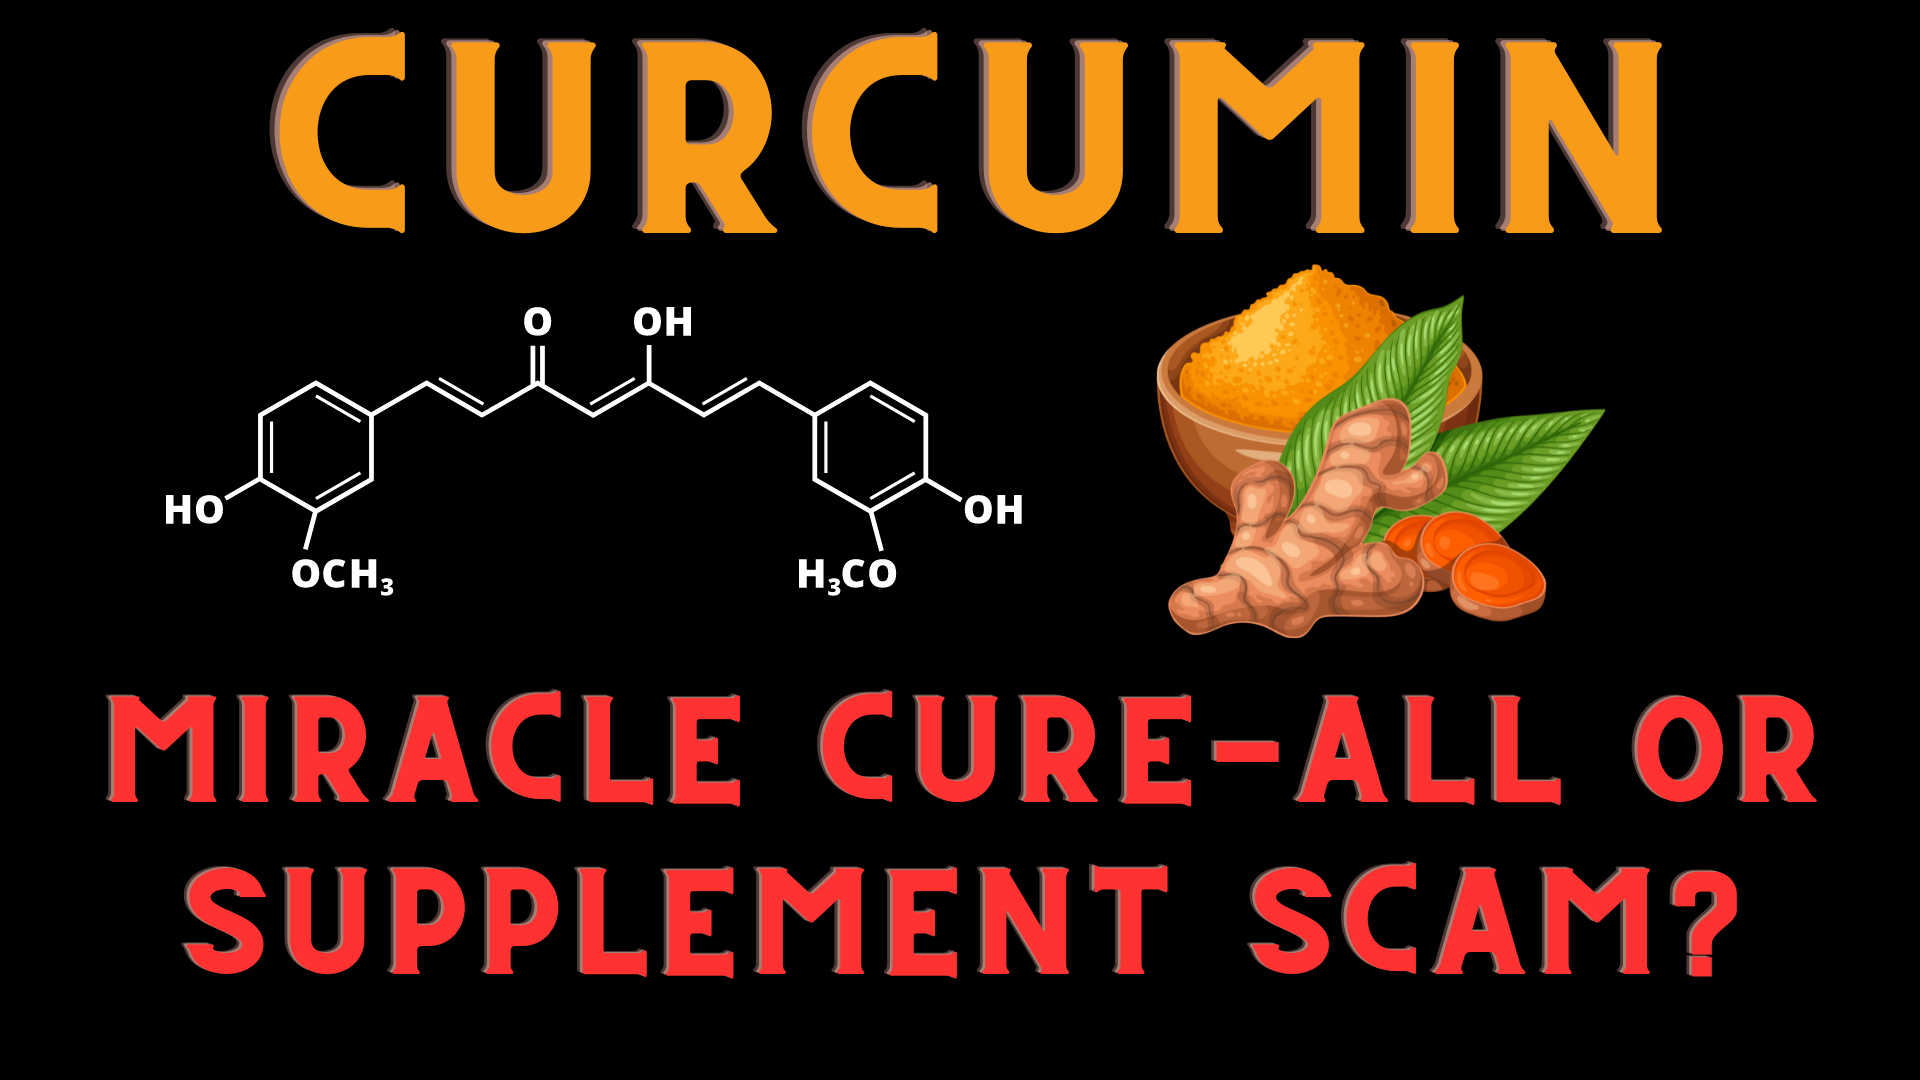 Curcumin: Miracle Cure-All or Supplement Scam?